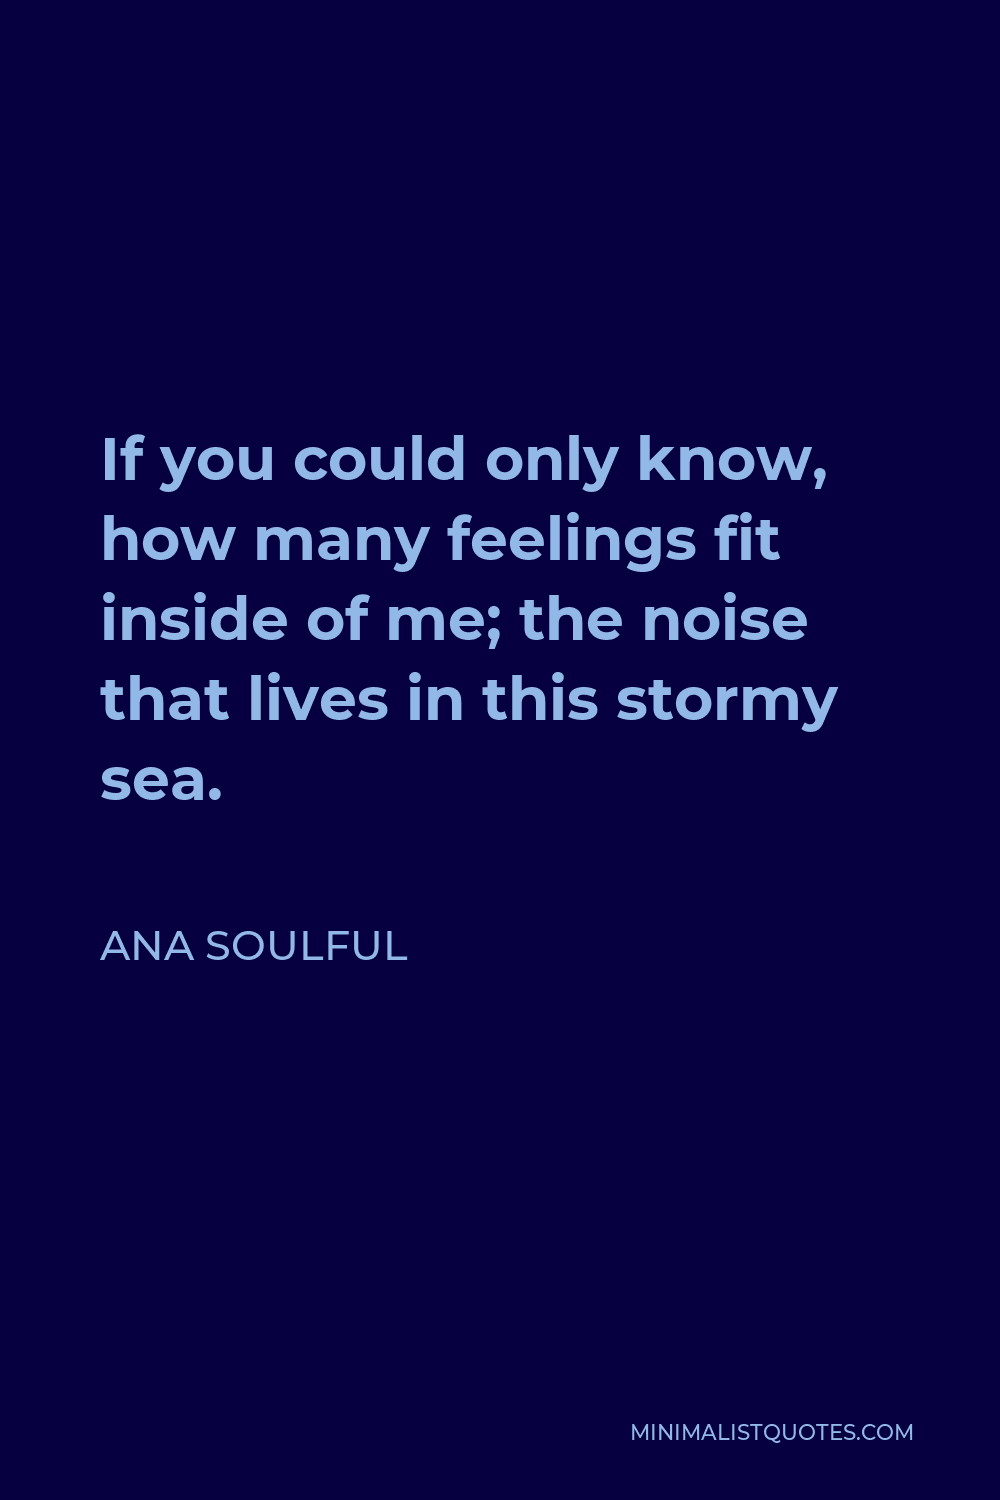 Ana Soulful Quote - If you could only know, how many feelings fit inside of me; the noise that lives in this stormy sea.